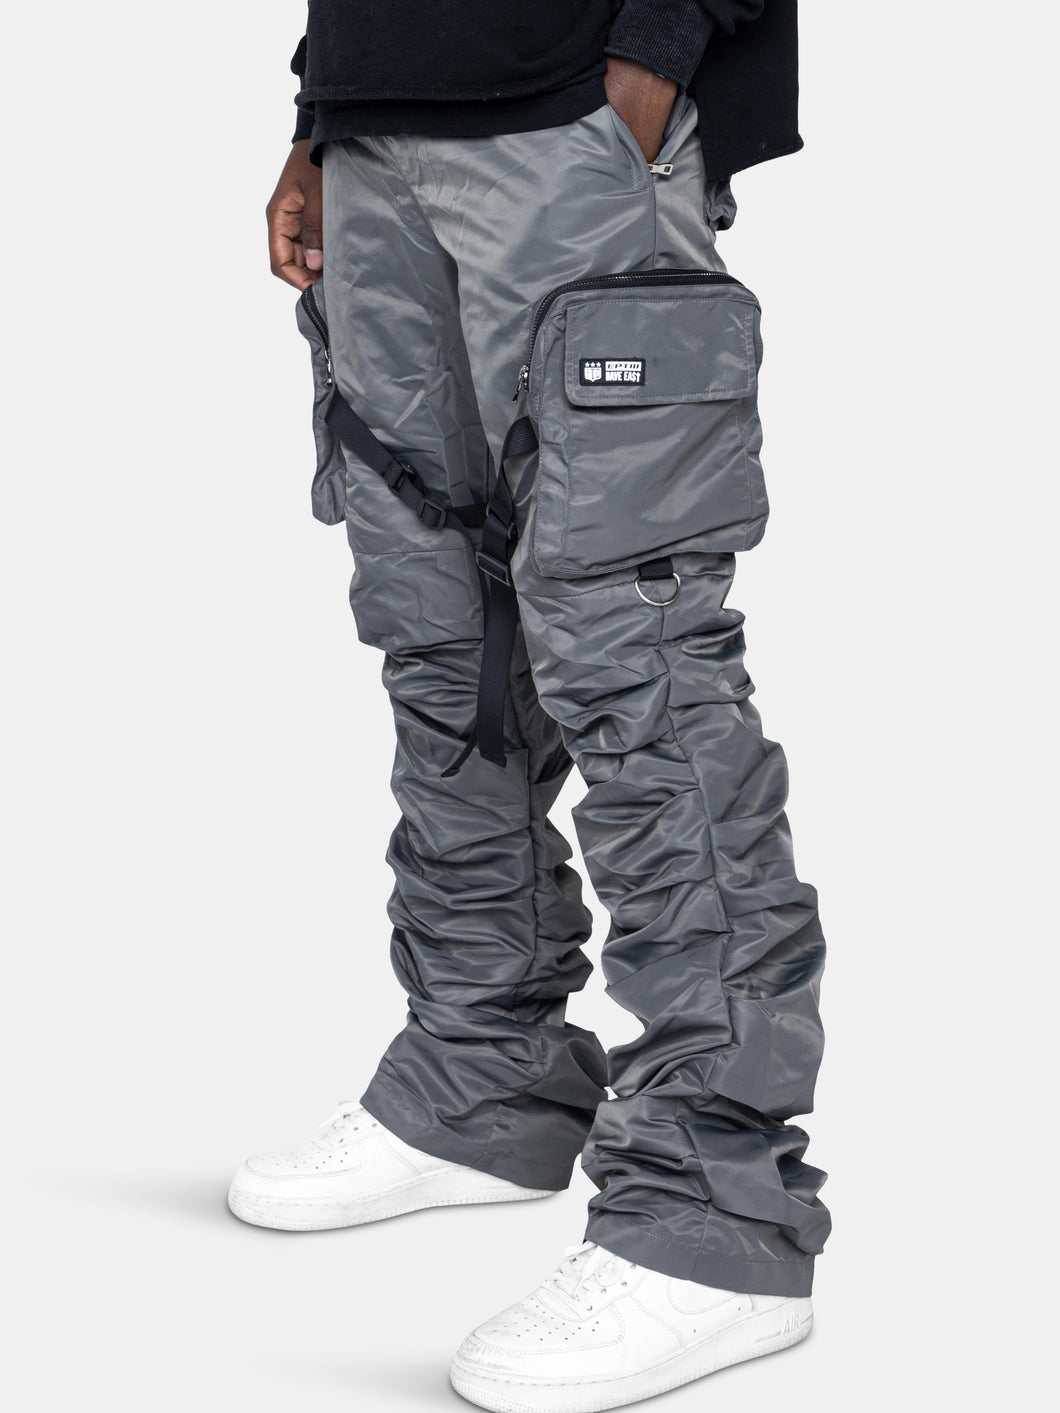 Dave East Strap Stacked Flare Pants